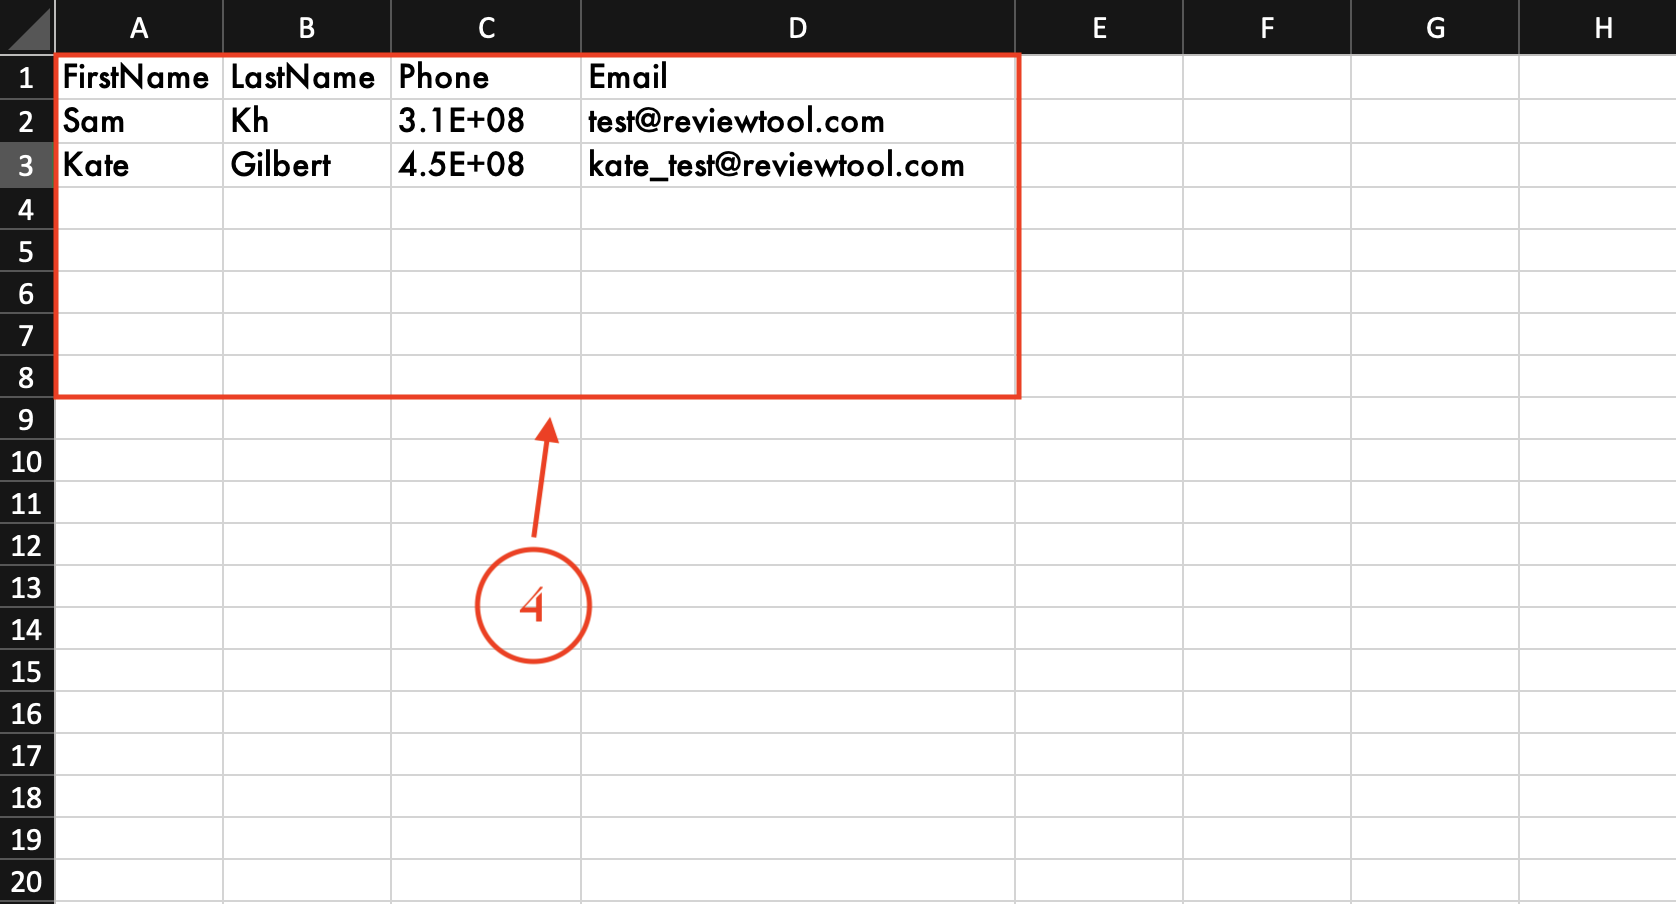 sample contact import csv file